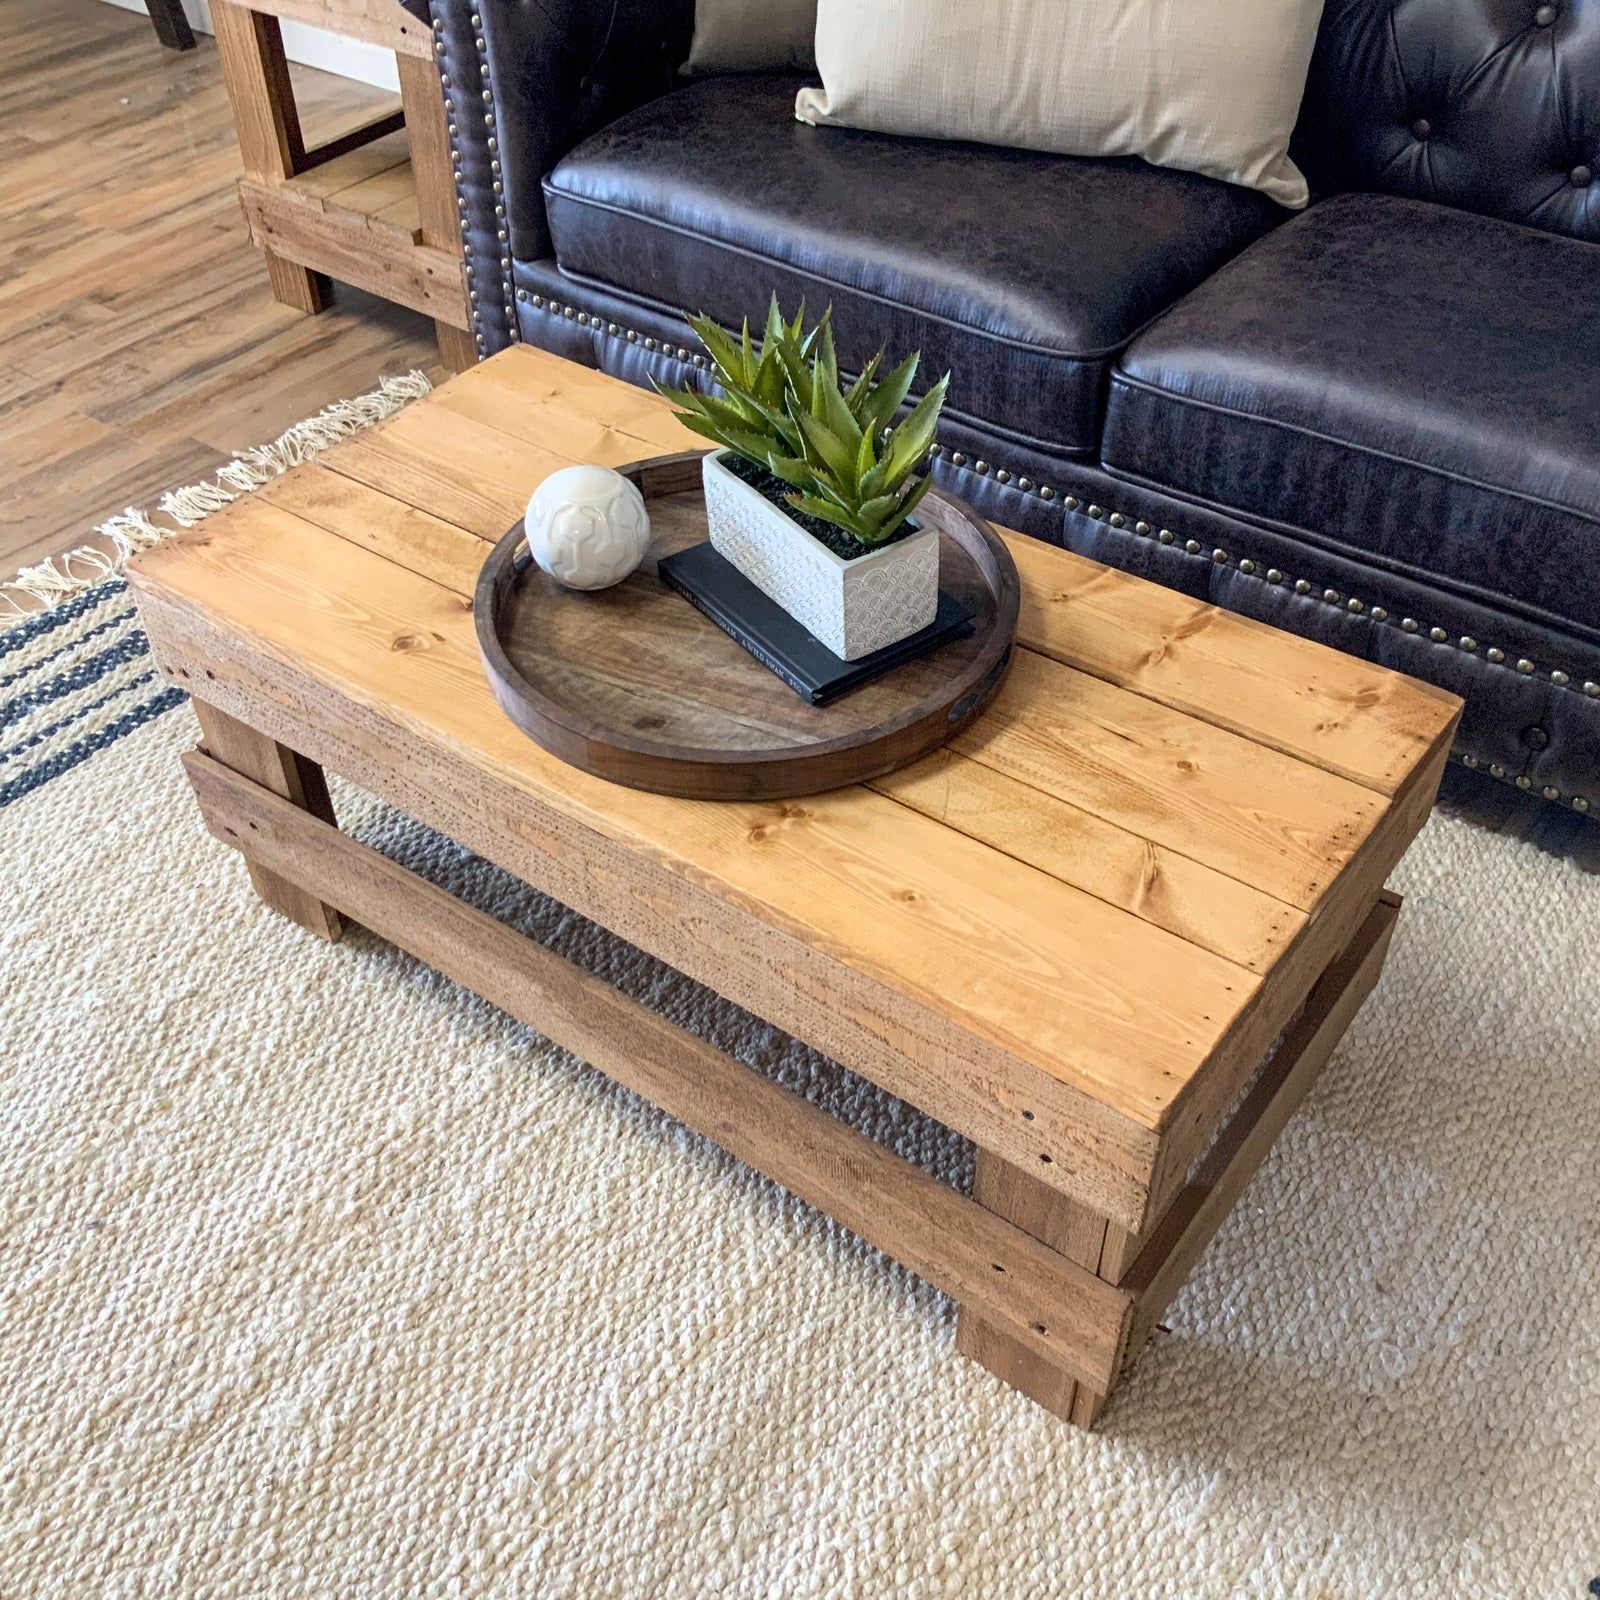 Woven Paths Landmark Pine Solid Wood Farmhouse Coffee Table, Walnut Pertaining To Woven Paths Coffee Tables (View 6 of 15)